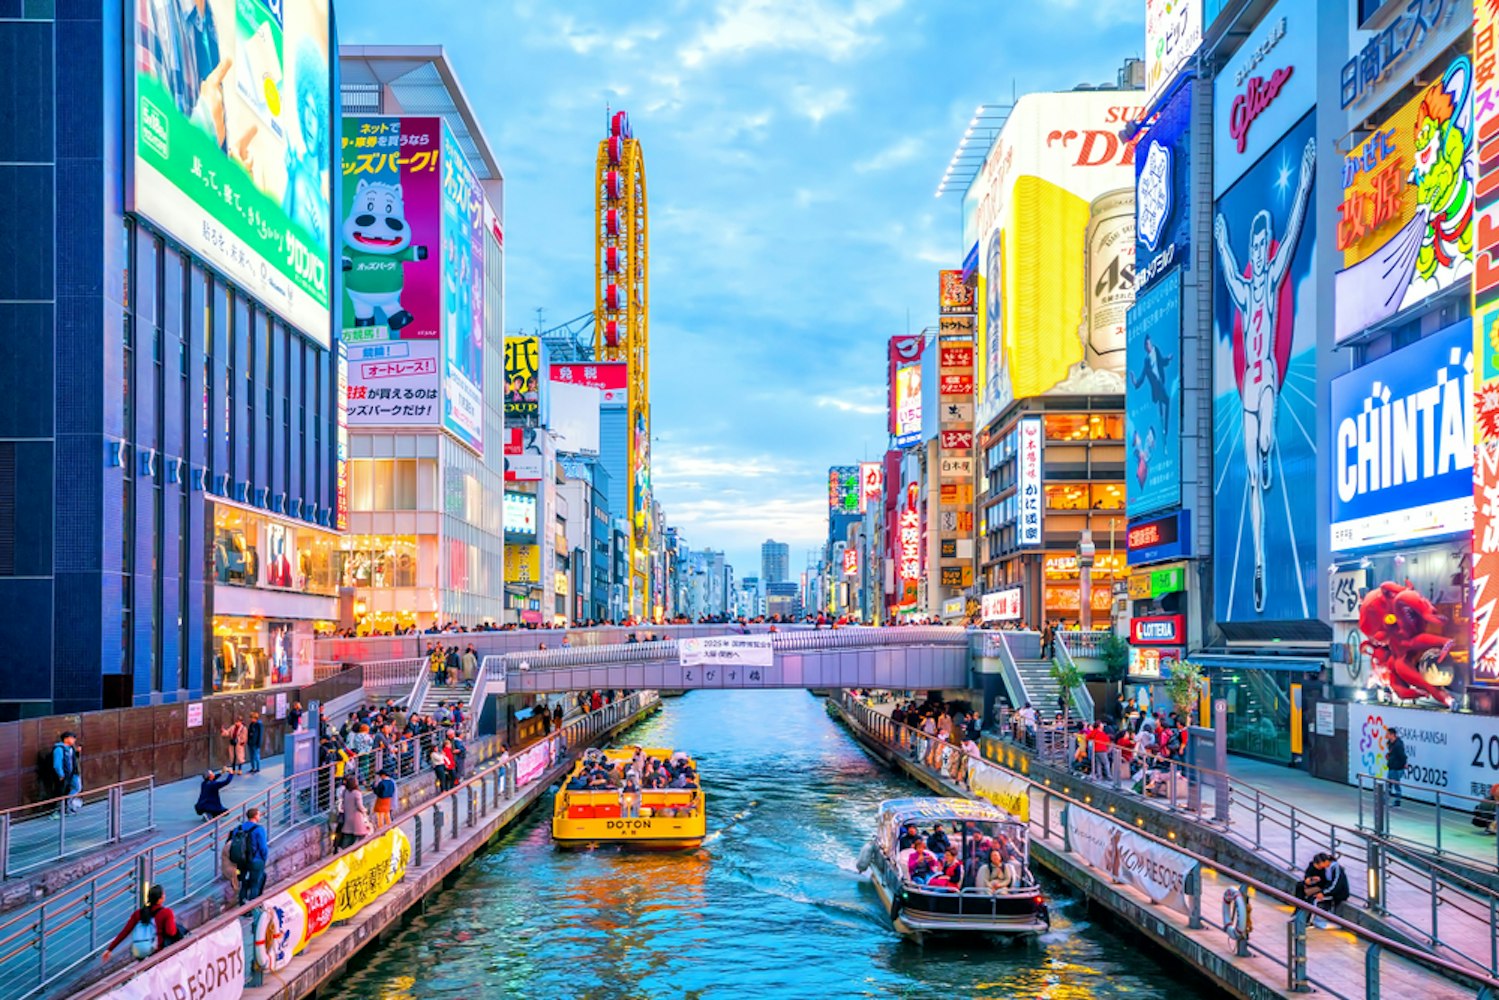 Dotonbori is a famous destination for traveling and shopping in Osaka